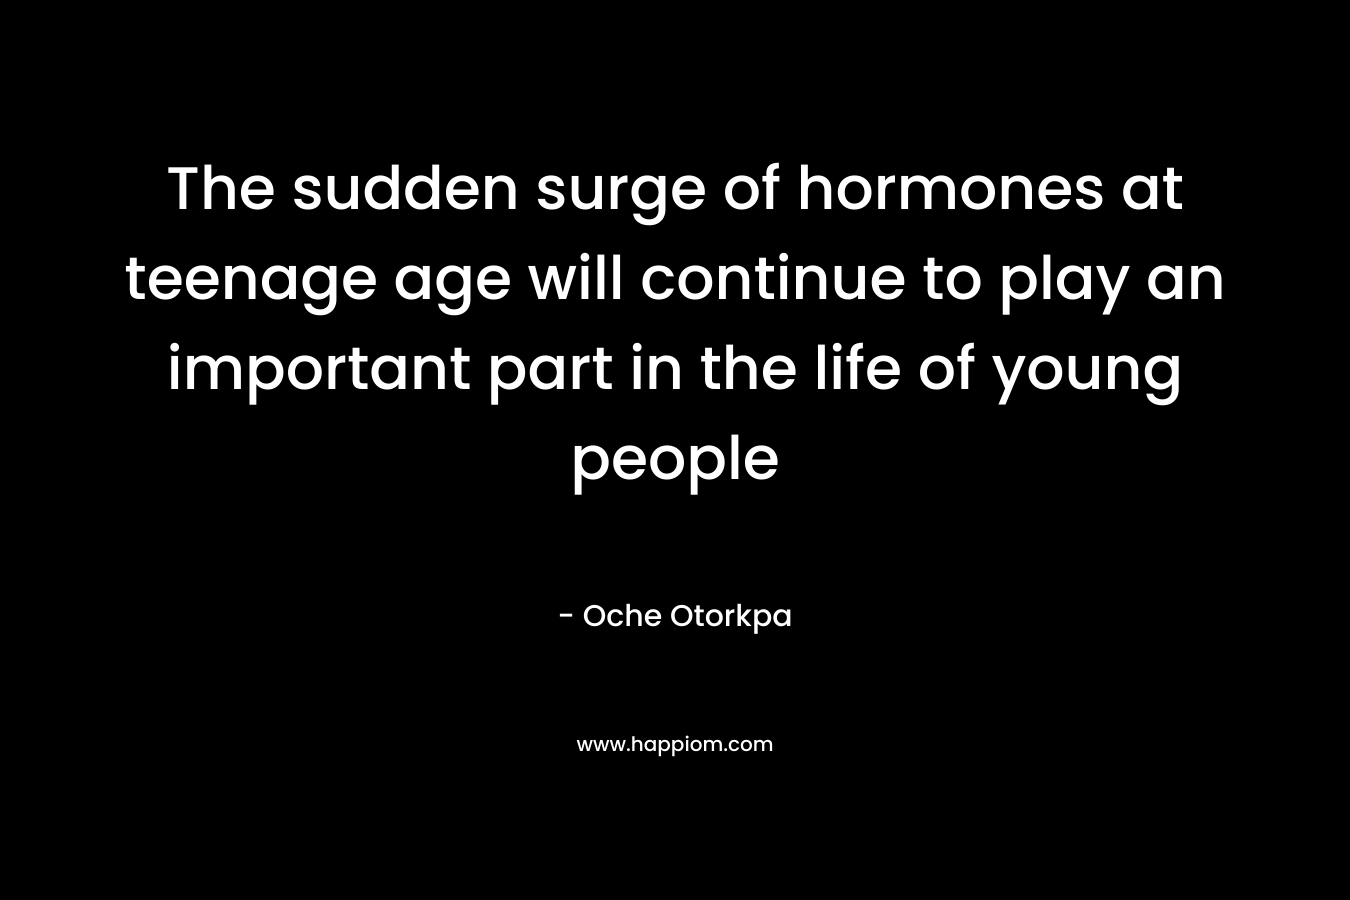 The sudden surge of hormones at teenage age will continue to play an important part in the life of young people